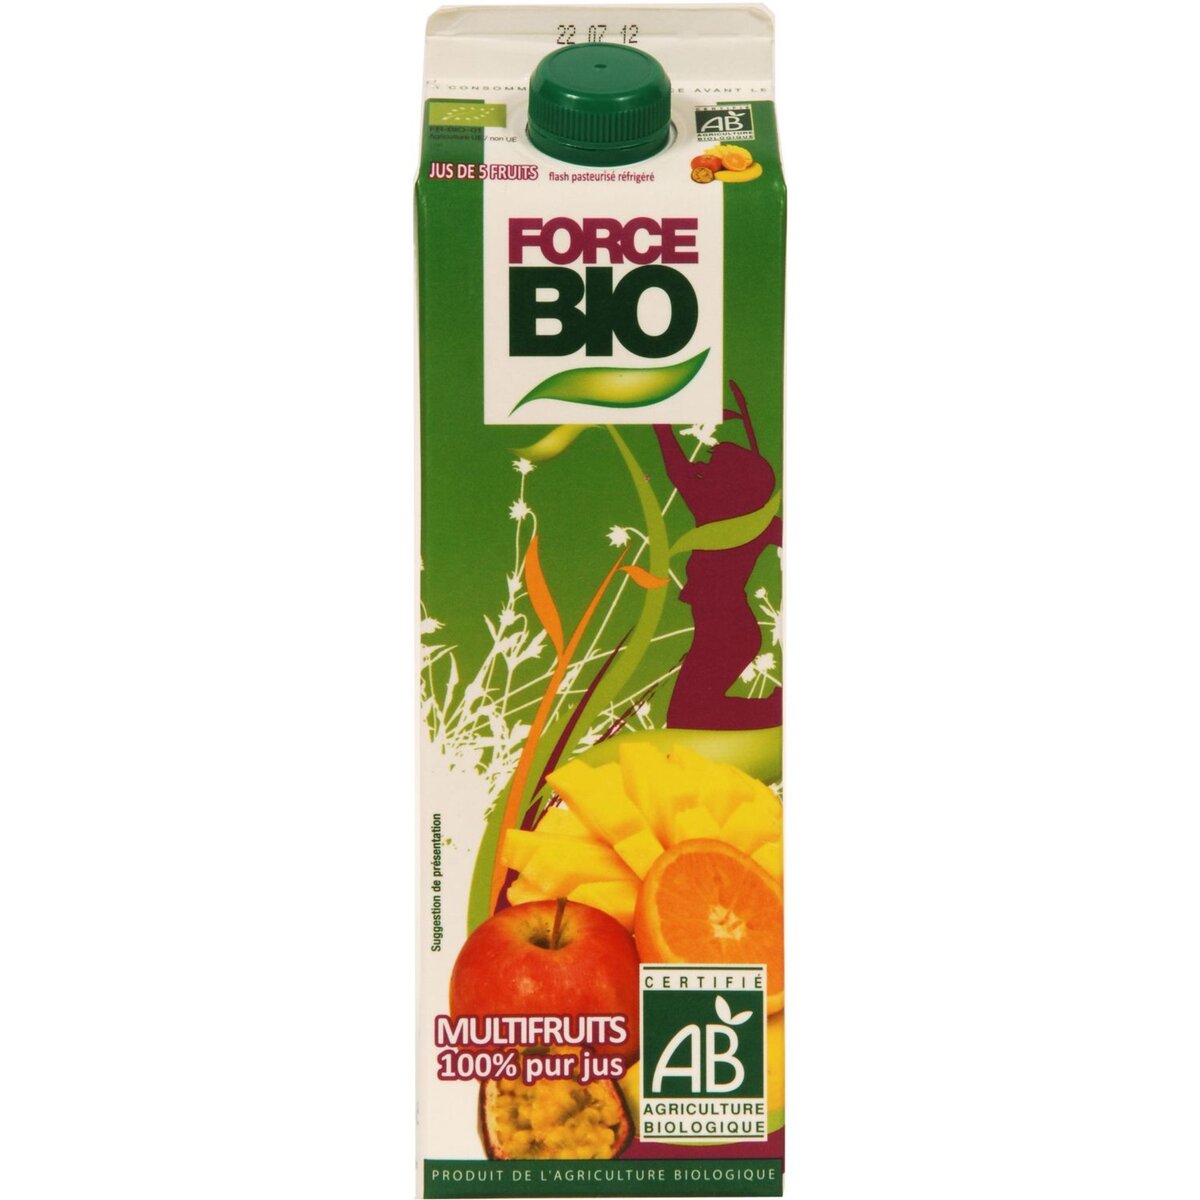 ANDROS Pur jus multifruits 1L